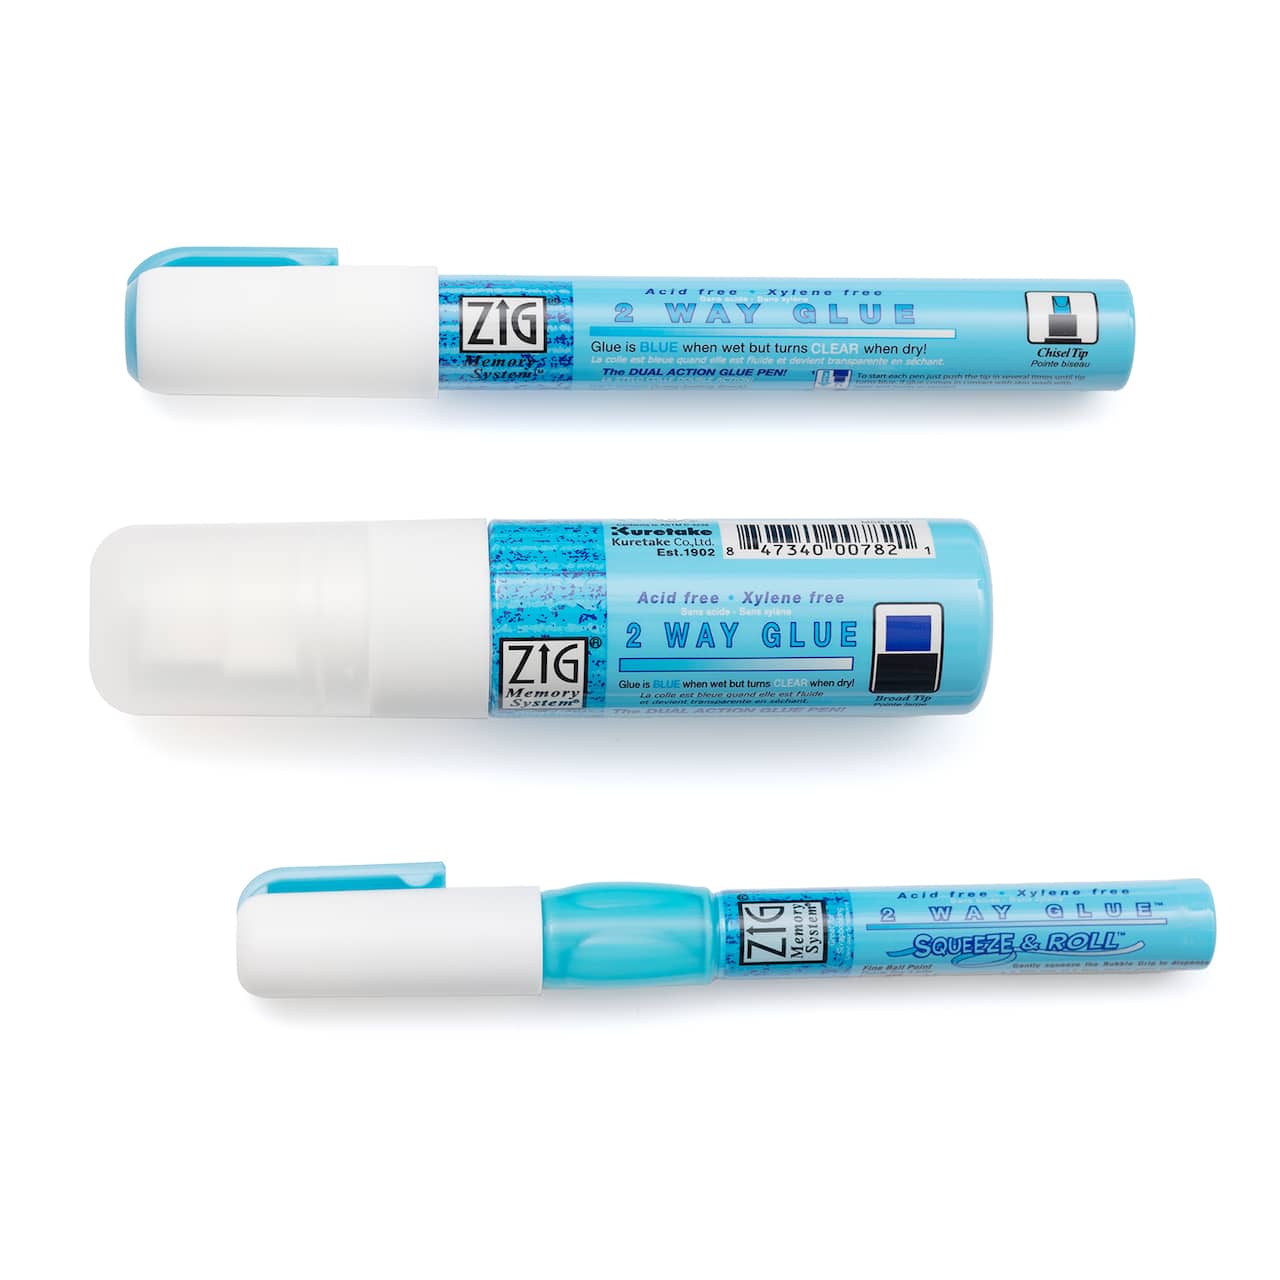 6 Packs: 3 ct. (18 total) Mixed 2-Way Glue Pens by Recollections